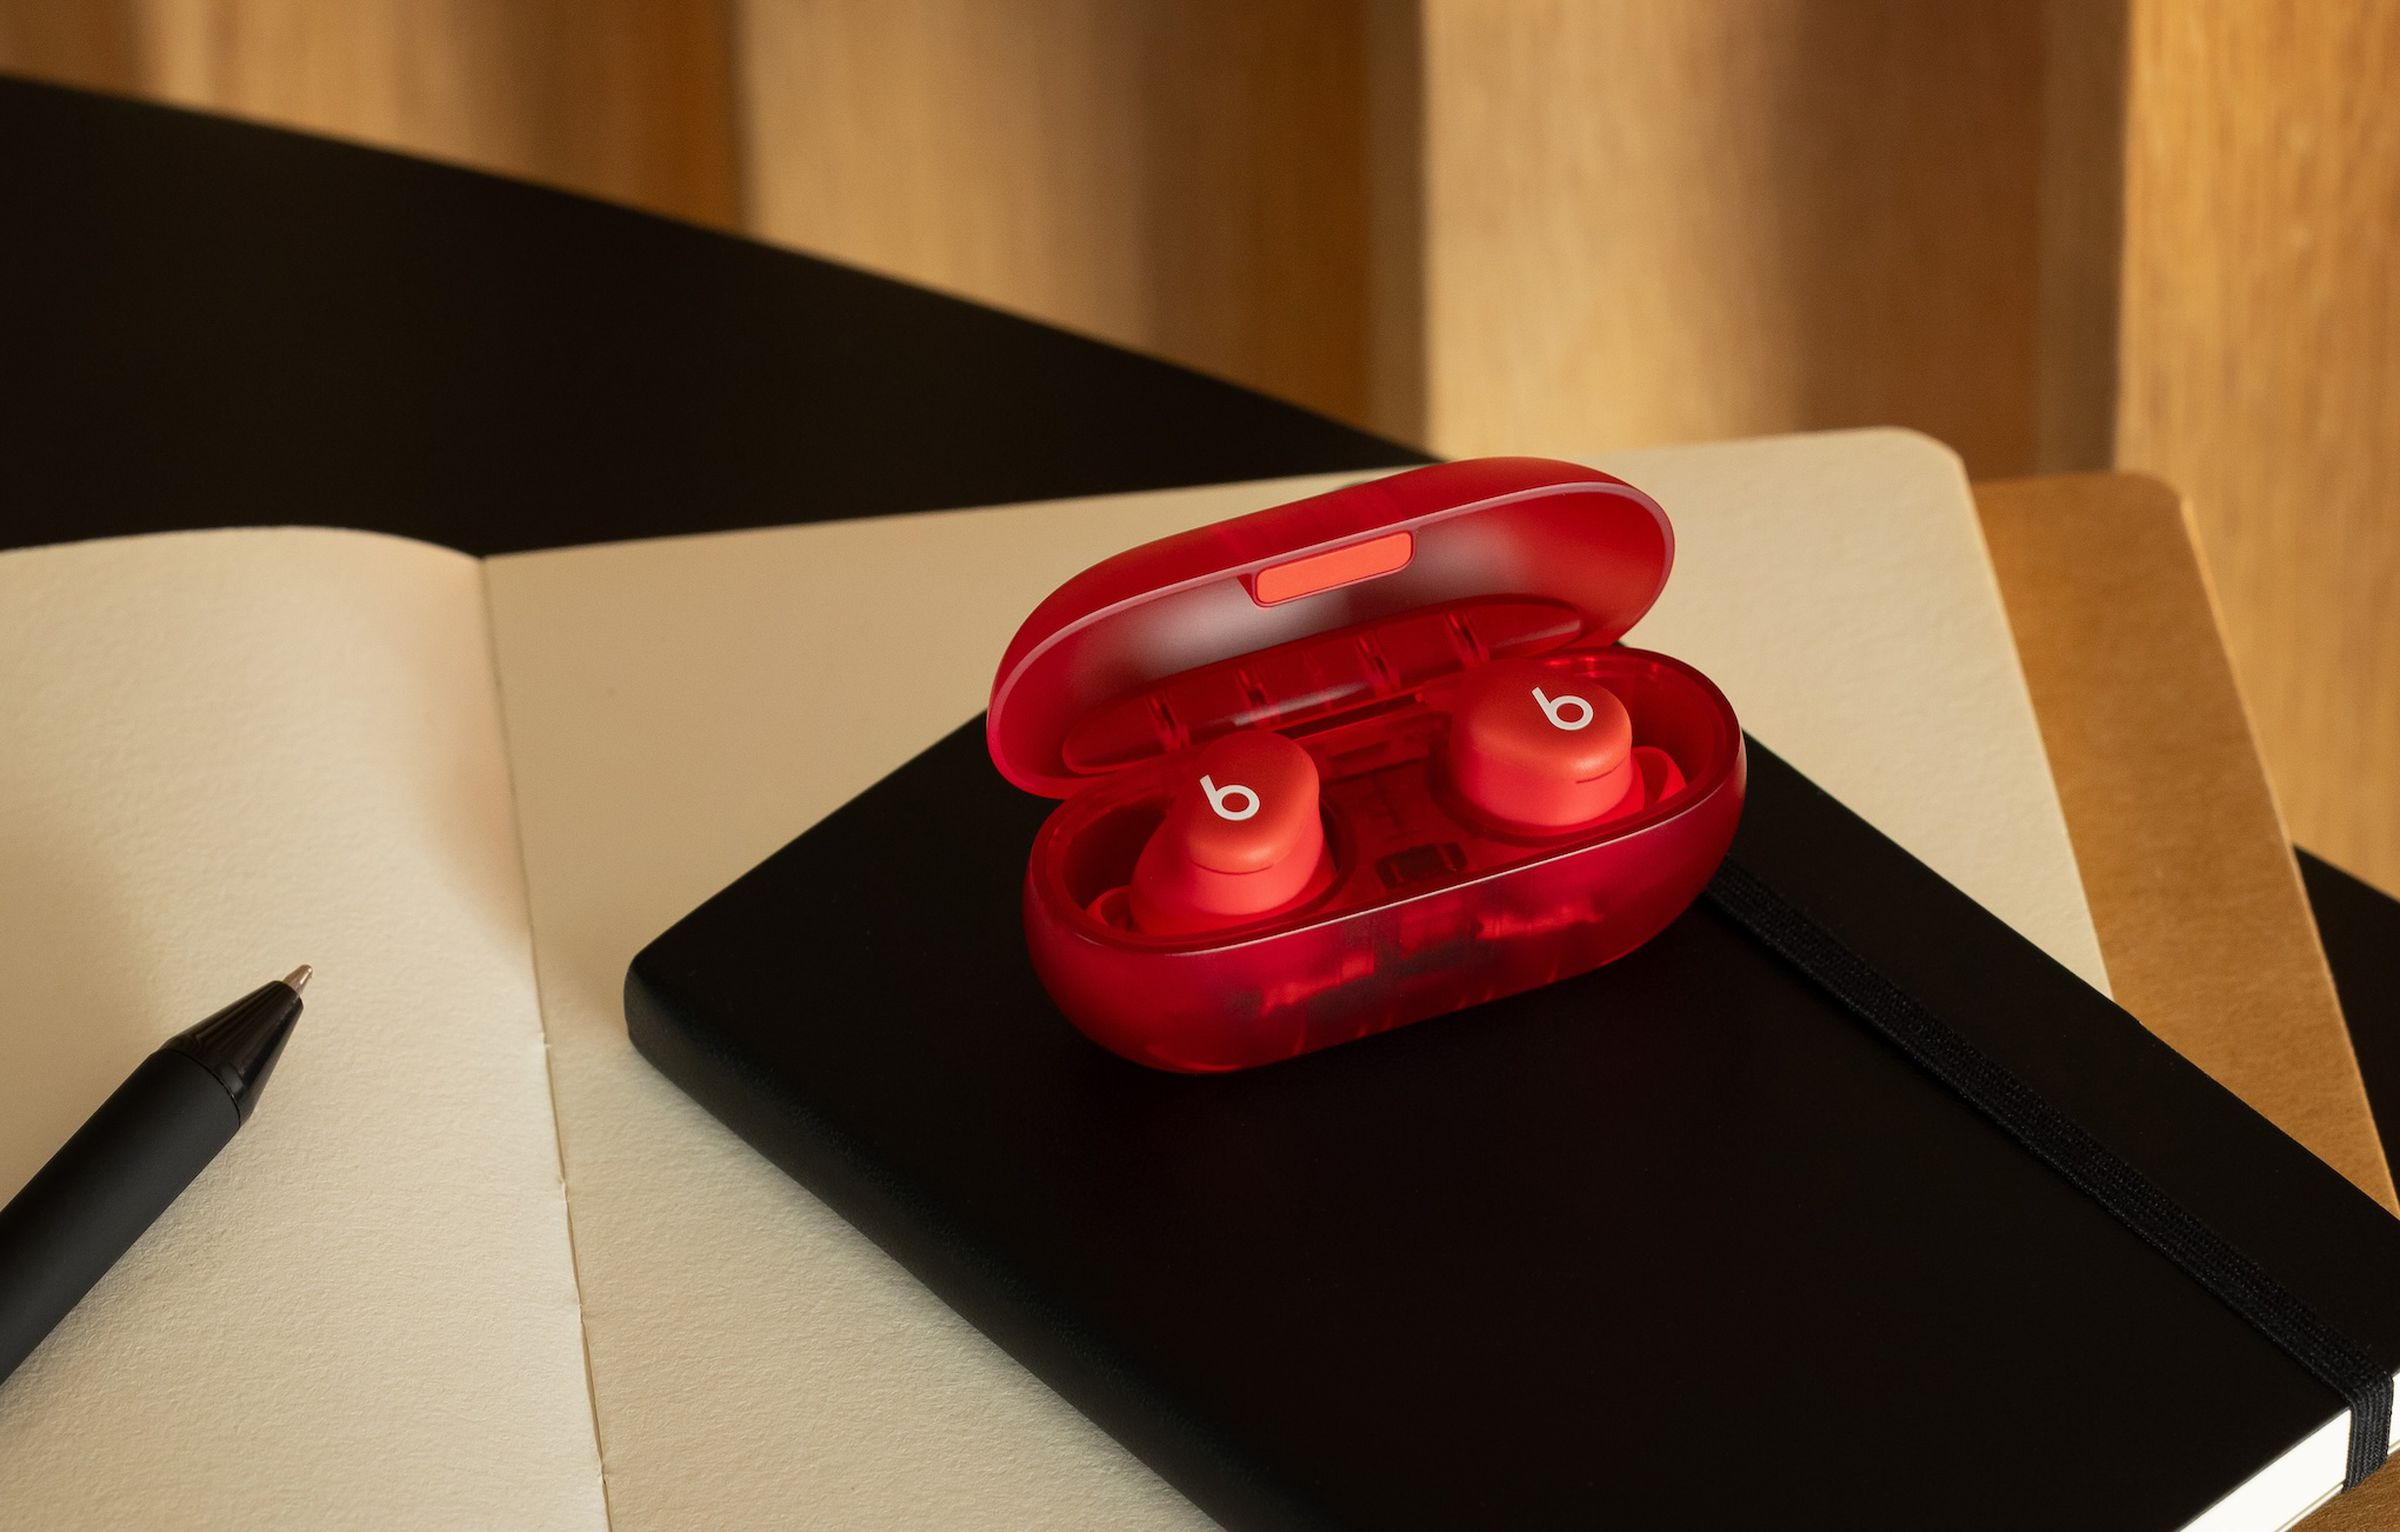 A marketing image of the Beats Solo Buds.